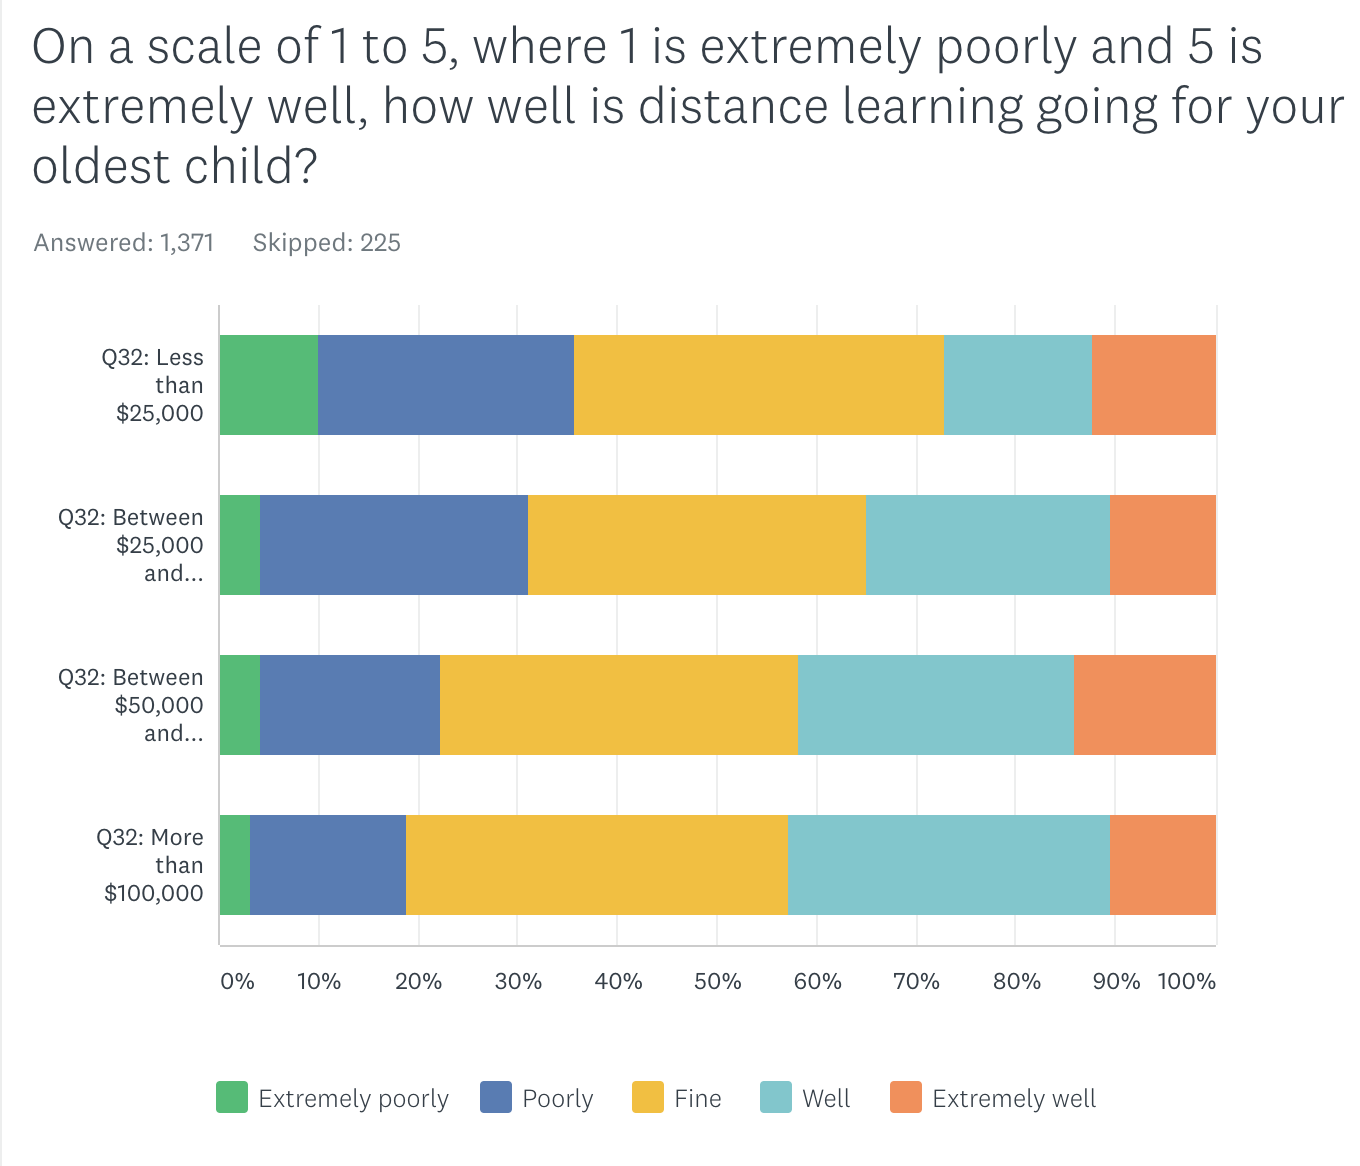 Parents from low-income homes are twice as likely to say remote learning is going poorly or very poorly.